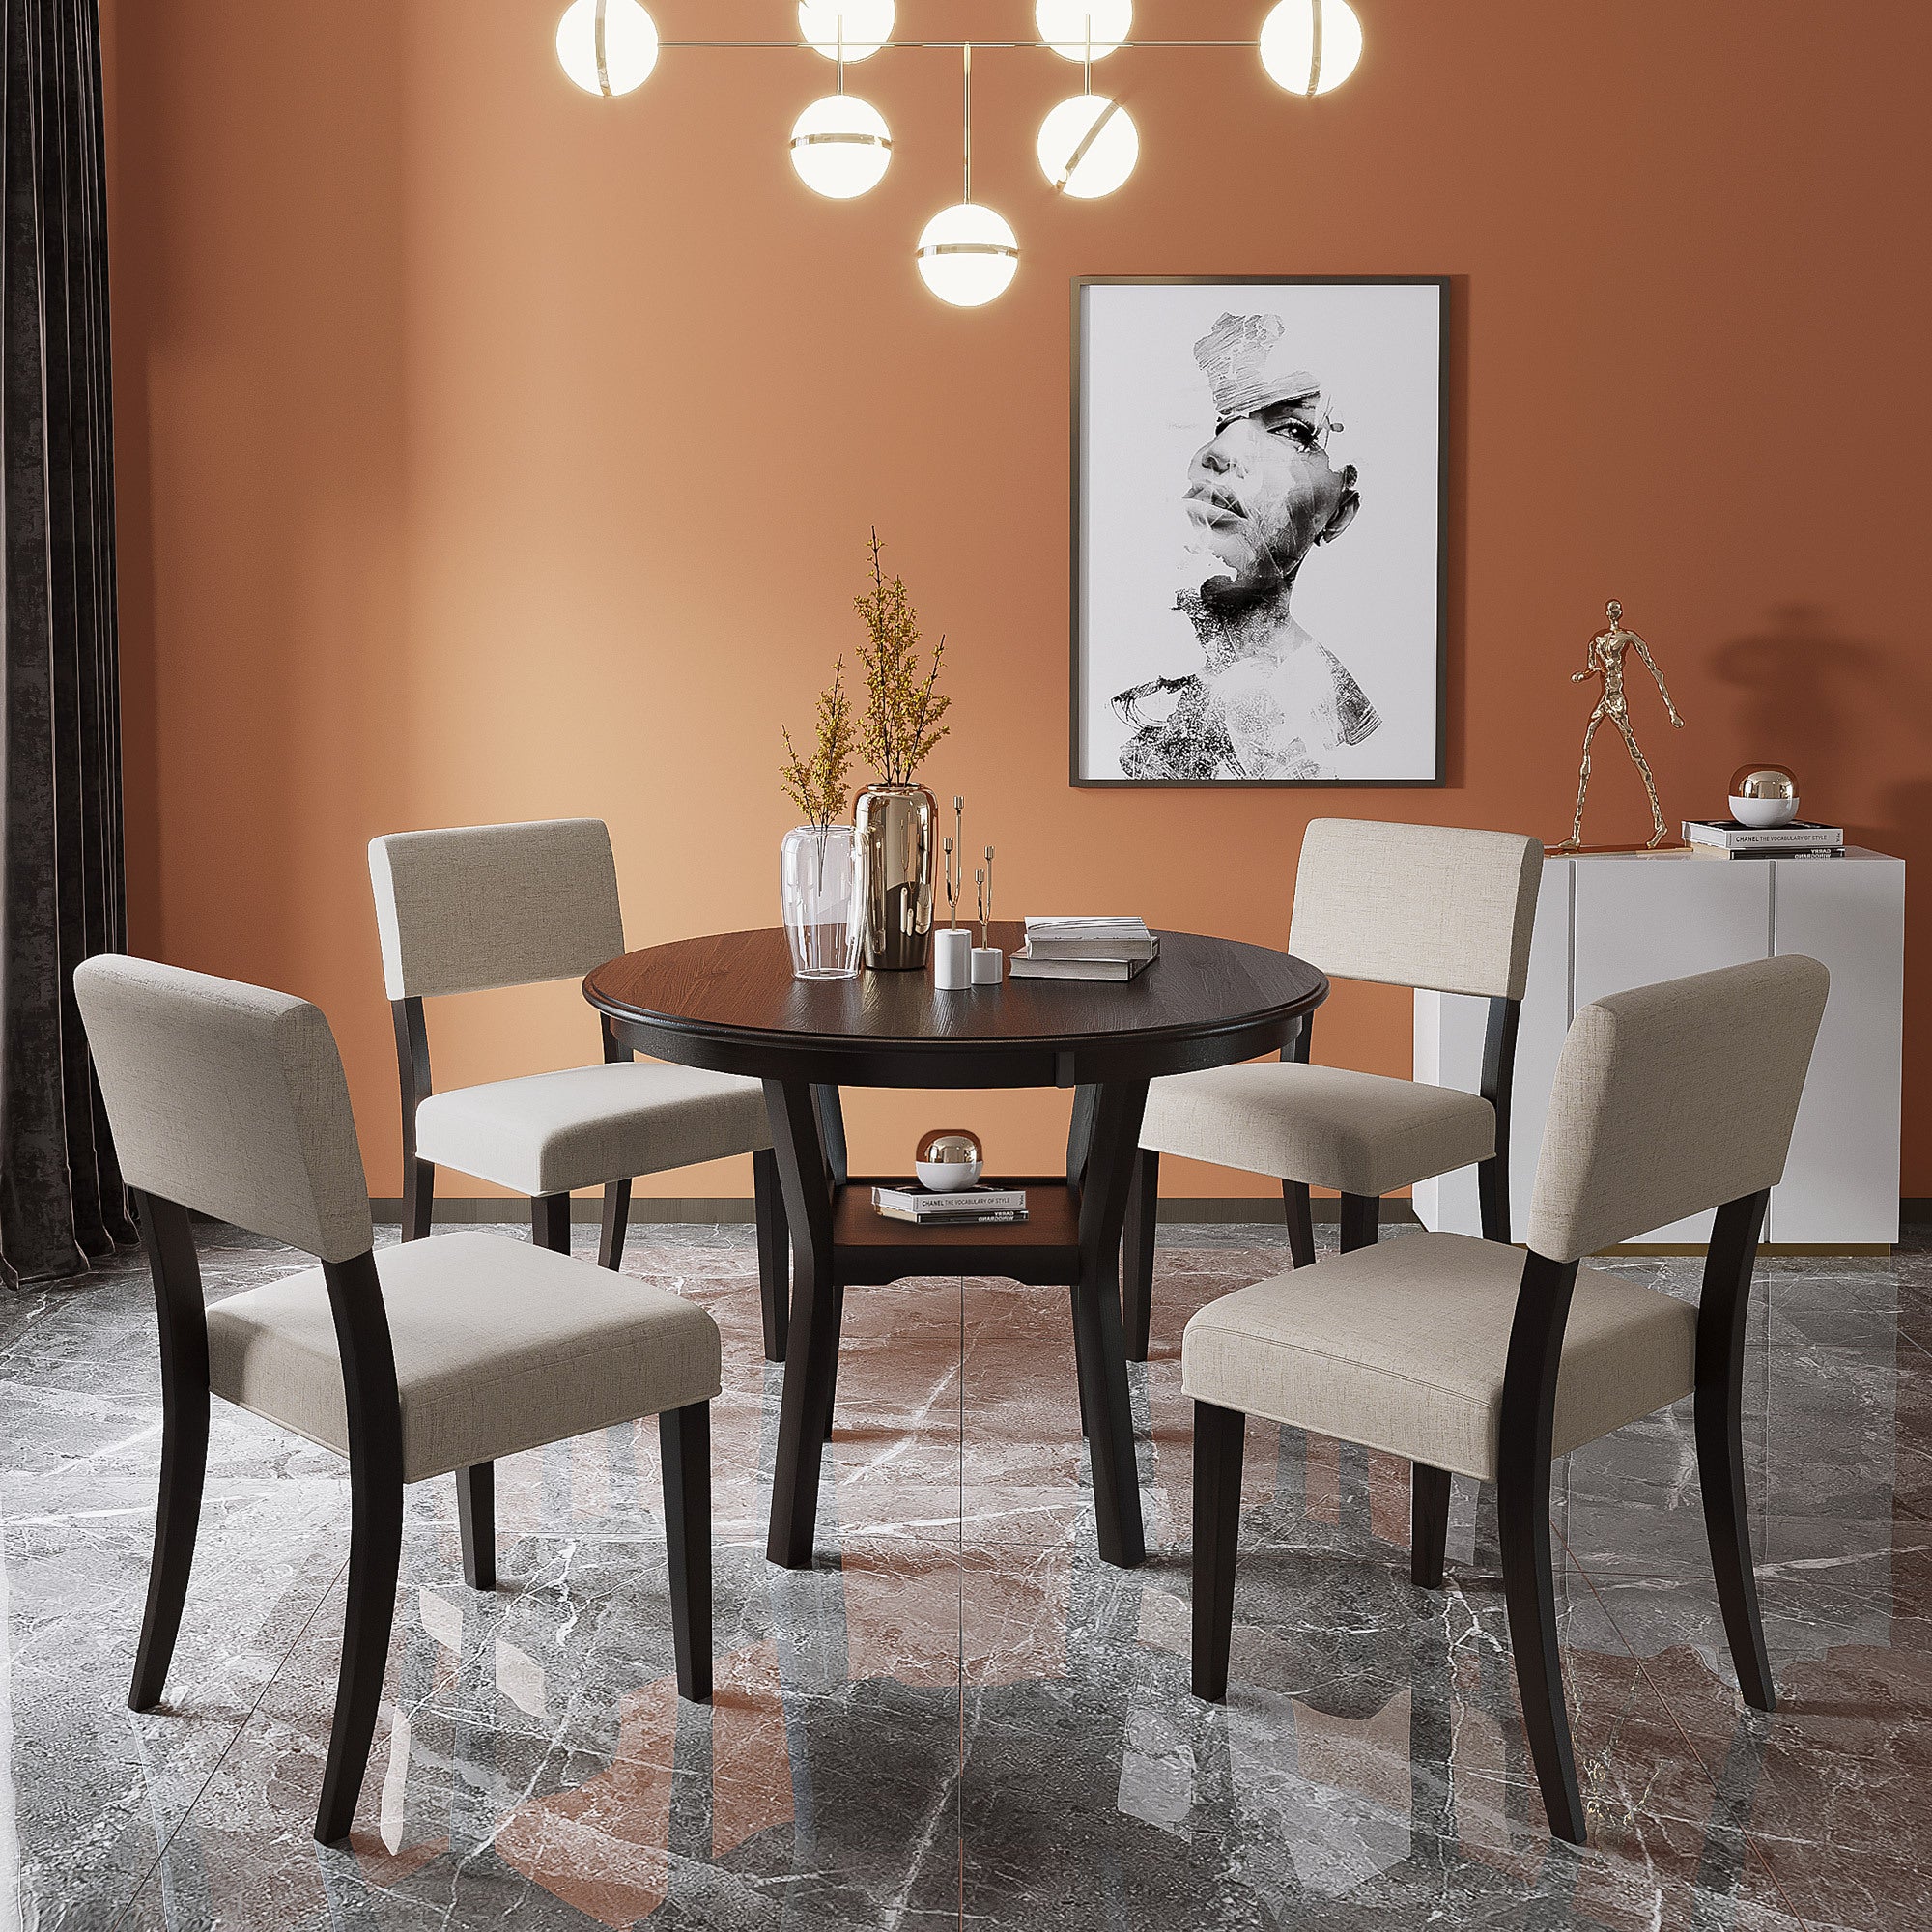 TREXM 5-Piece Kitchen Dining Table Set Round Table with Bottom Shelf, 4 Upholstered Chairs for Dining Room（Espresso）